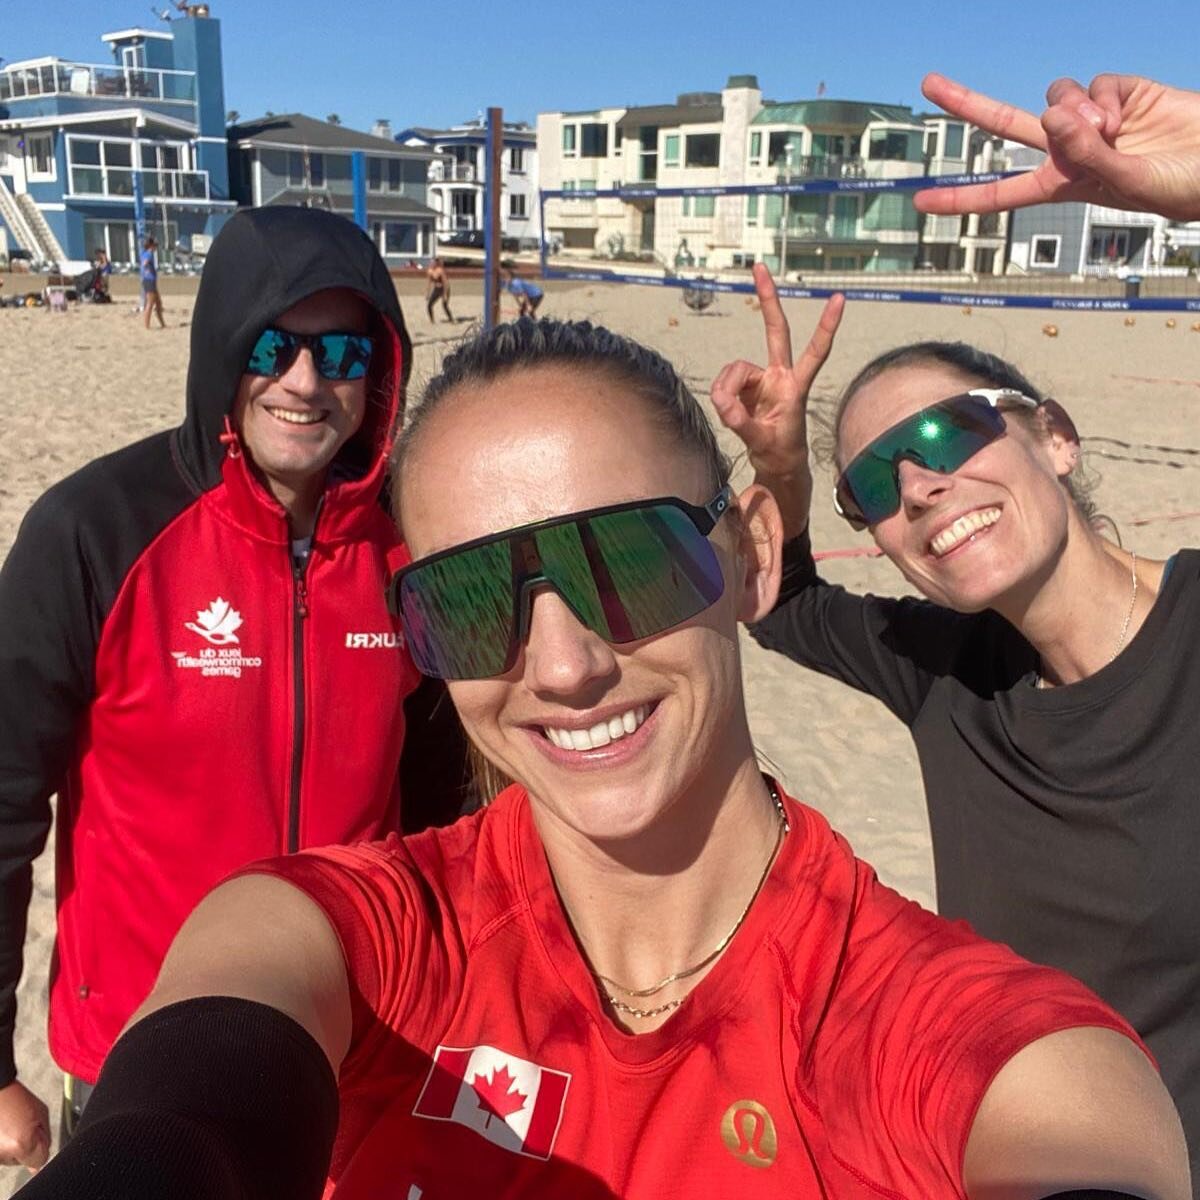 Let the games begin! Beach Pro Tour Finals and the 2023 season start today! 

First match is at 6:00 am ET vs 🇦🇺 

Let&rsquo;s goooooo!! 💪🏻💥 I can&rsquo;t believe it&rsquo;s already here!!

#beachvolleyball #beachprotourfinals #beachprotour #scl